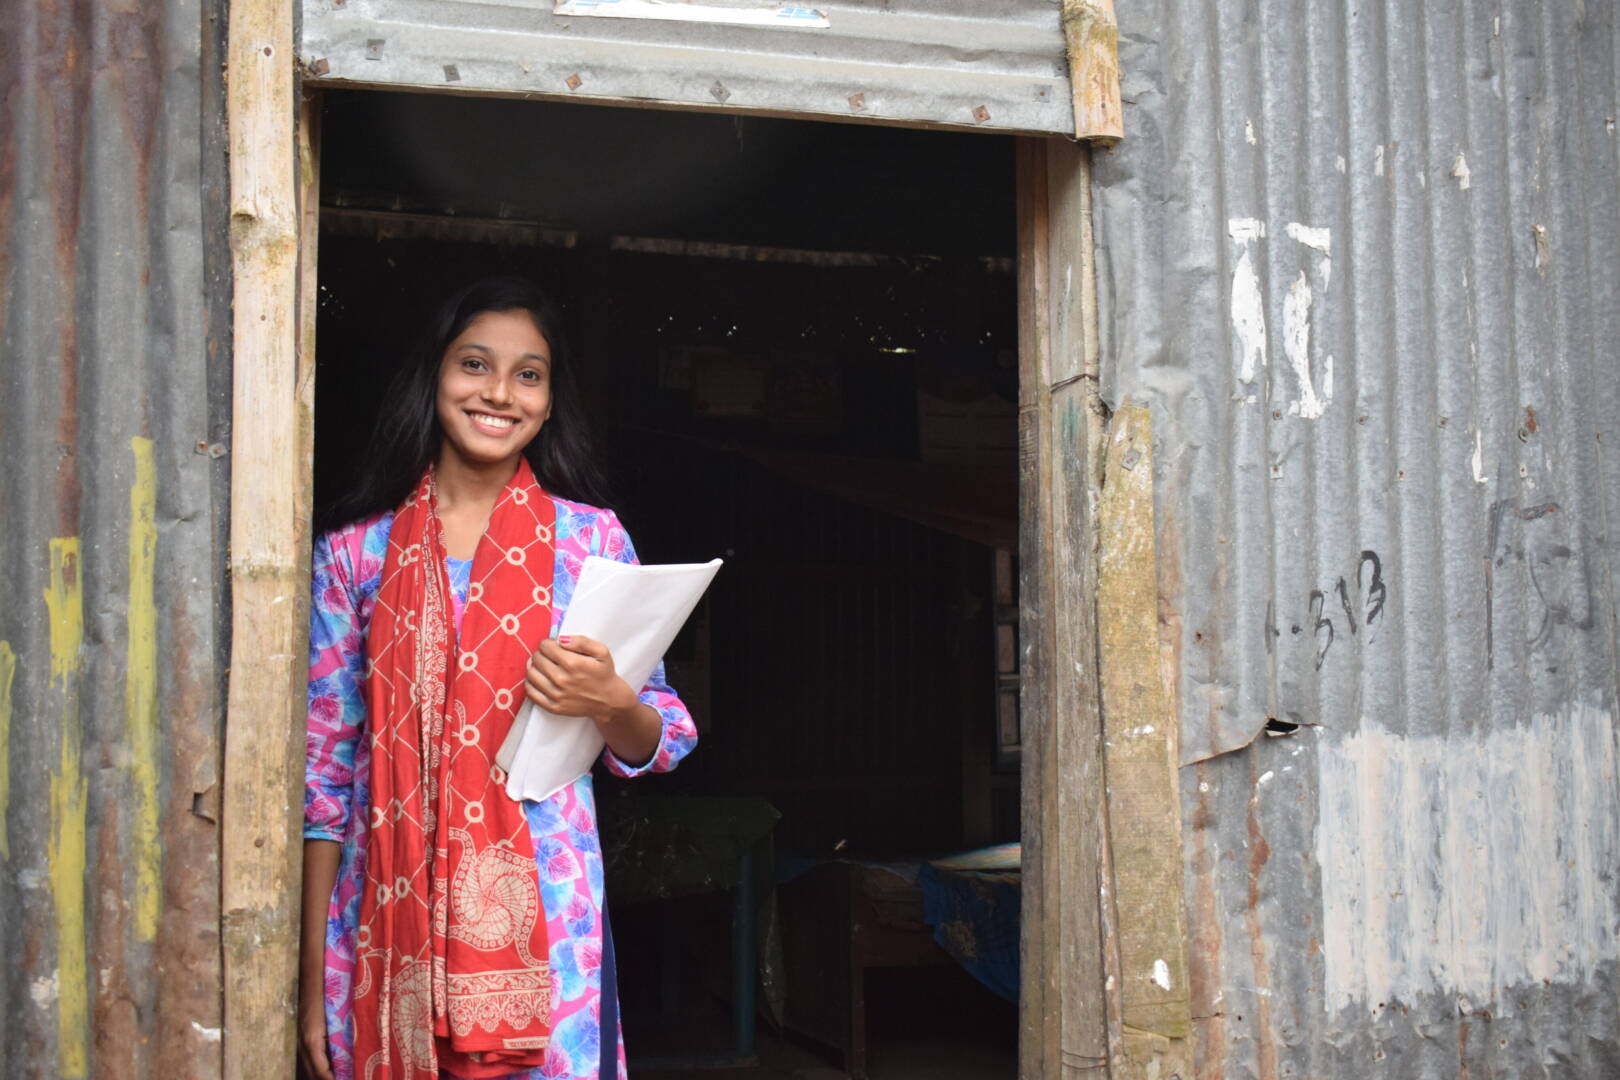 A teenage girl smiles widely in brightly patterned clothes and holds white papers in her hand.